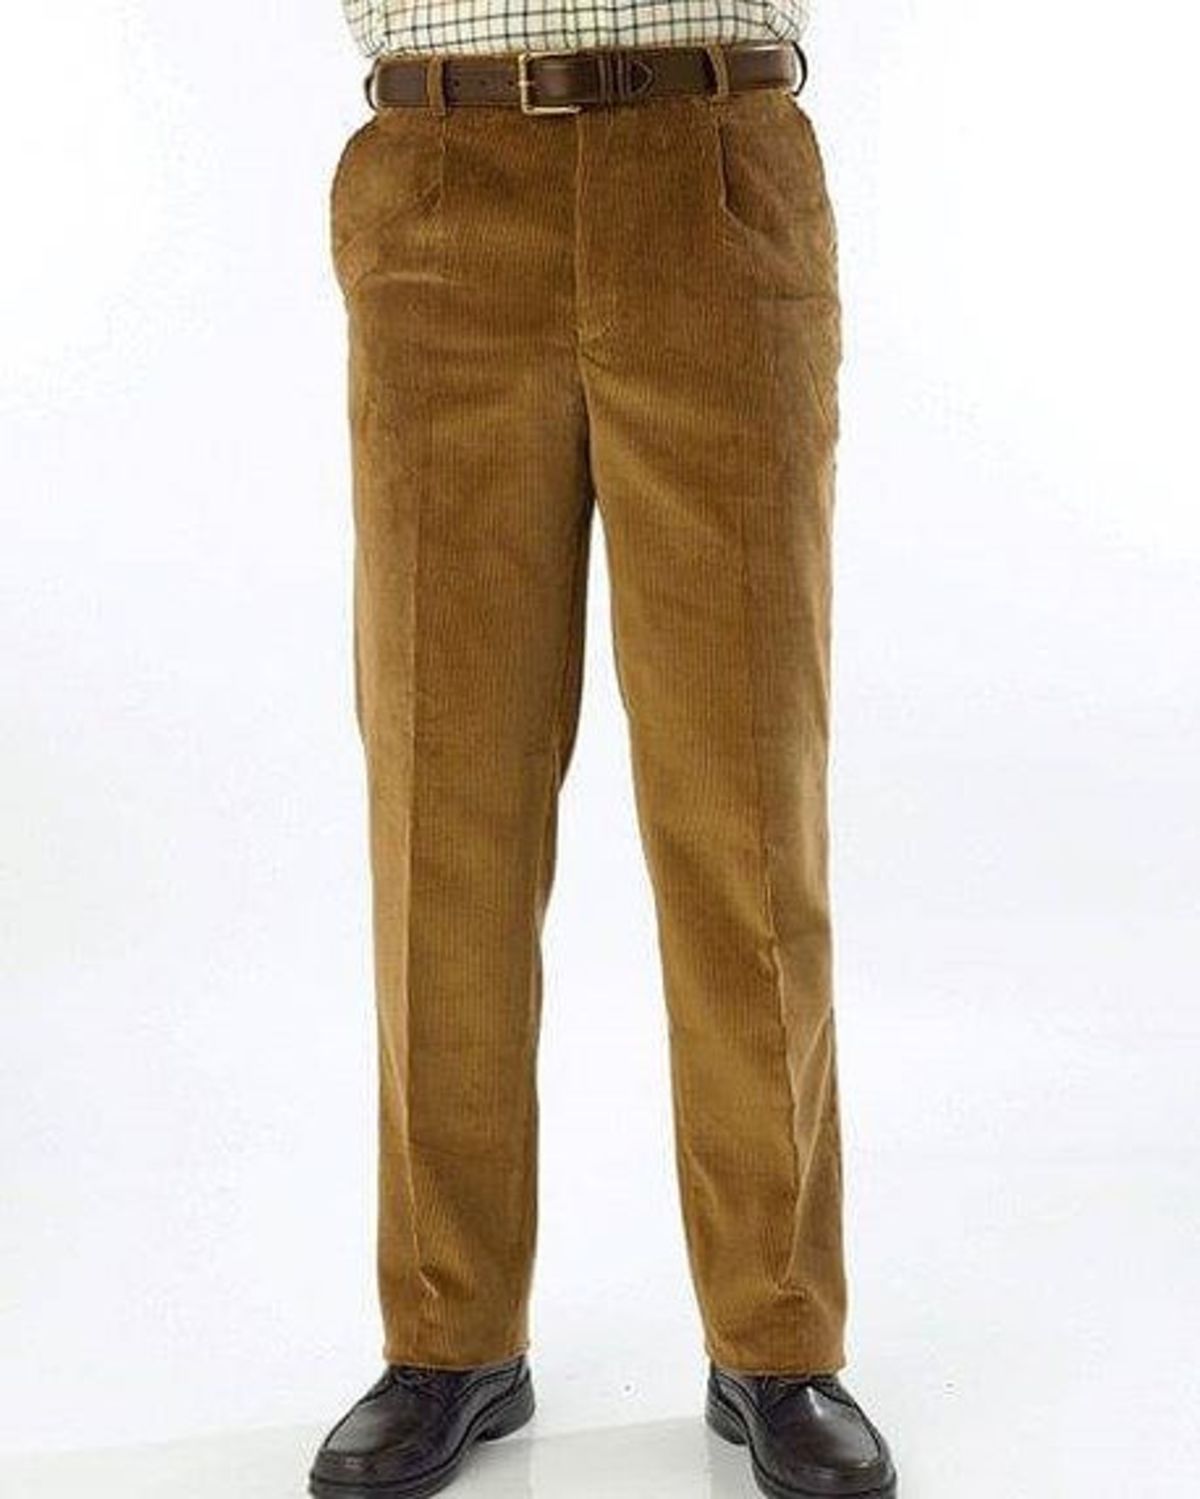 Mens corduroy trousers available in 8 Colours Sizes 3244